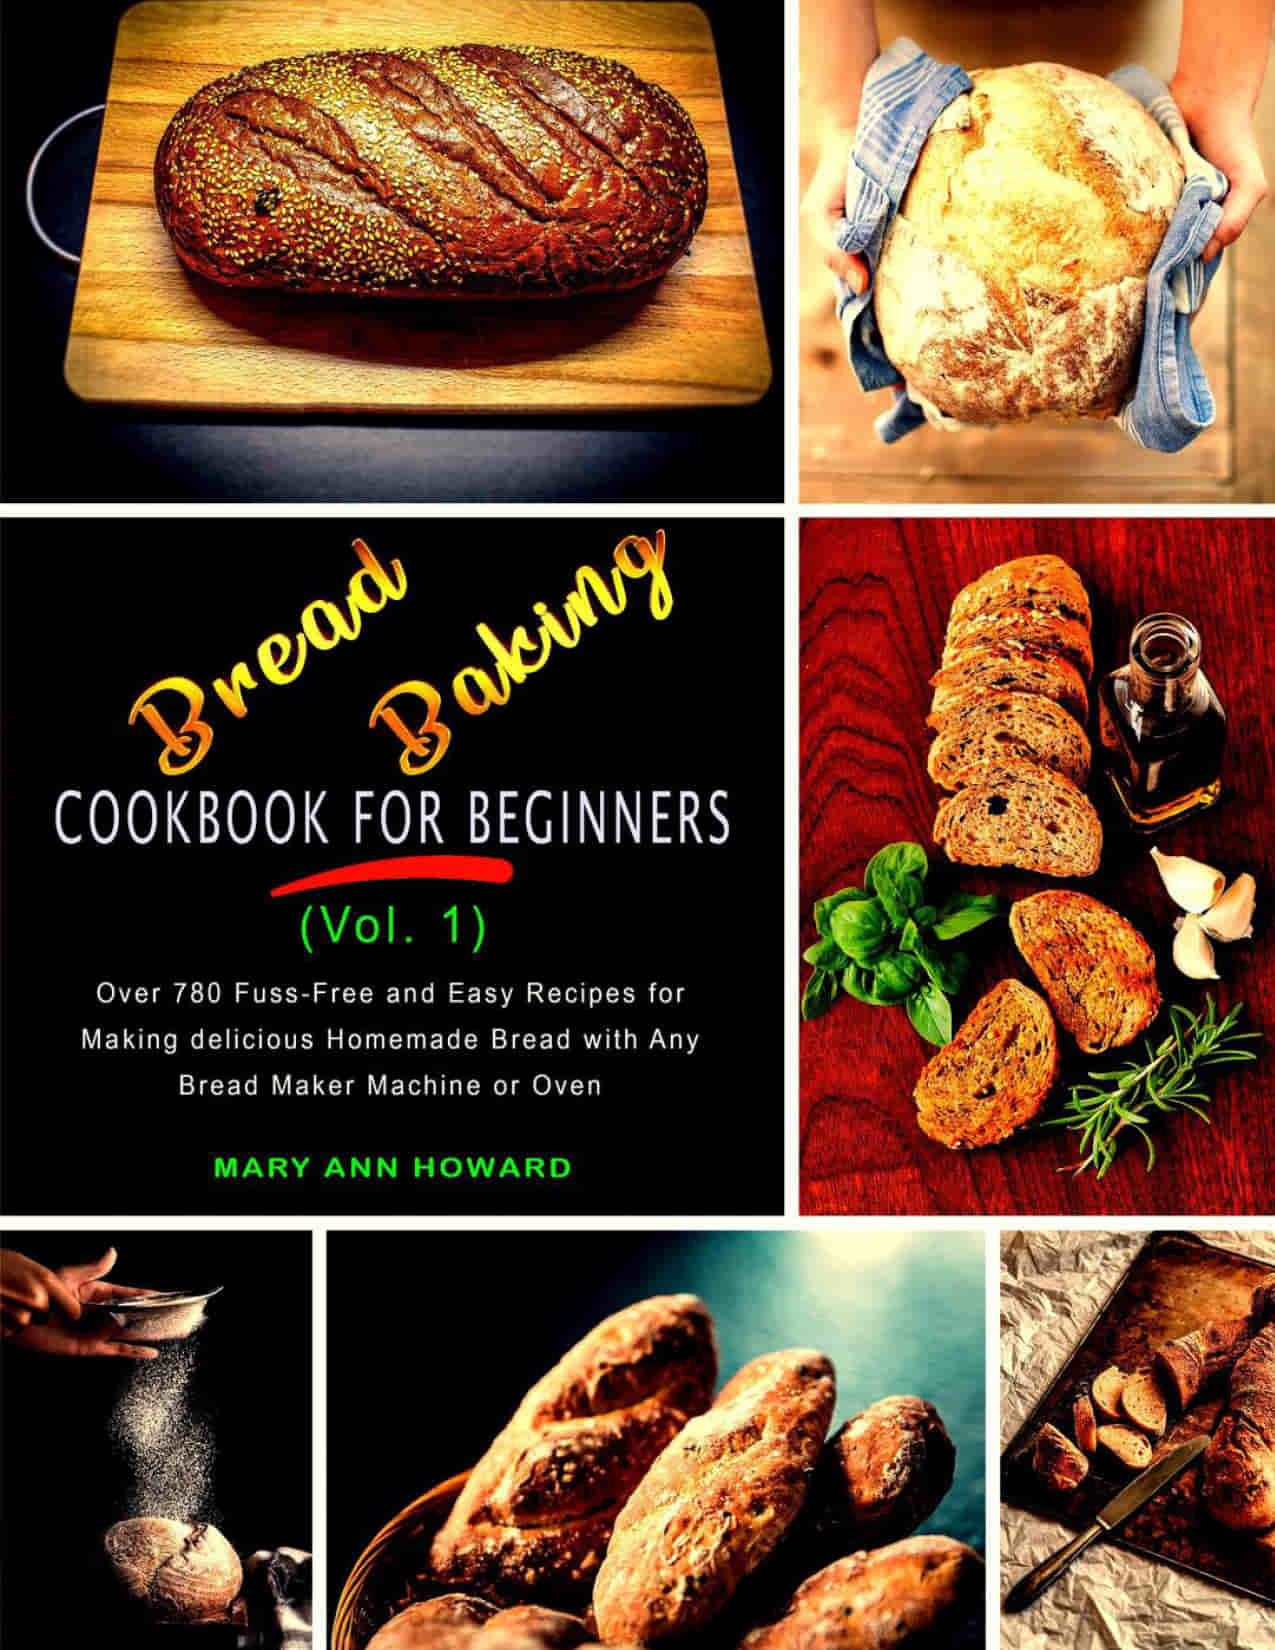 Using Your Oven To Bake Your Own Bread | Ovenu